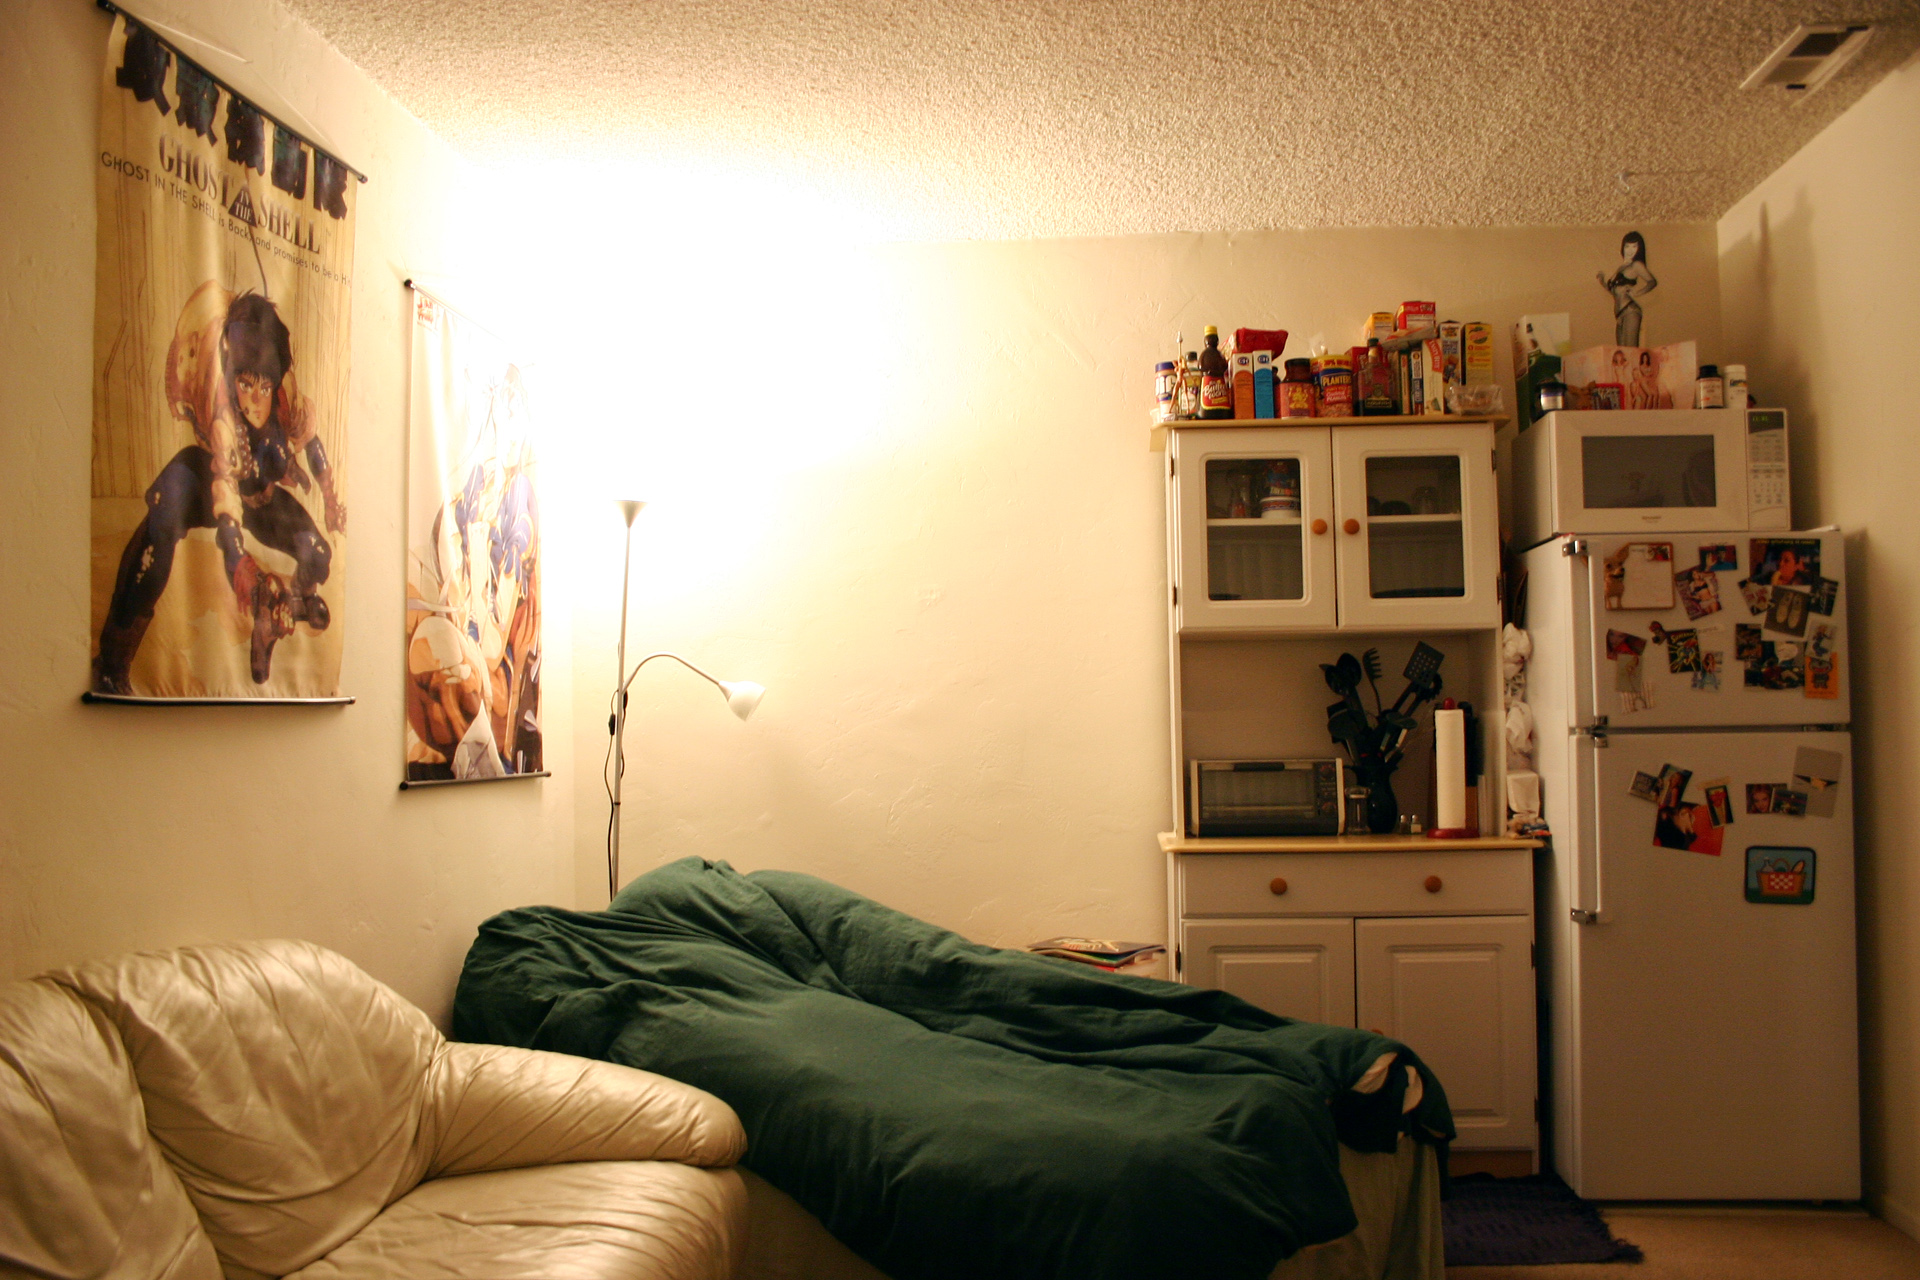 The bedroom and kitchen